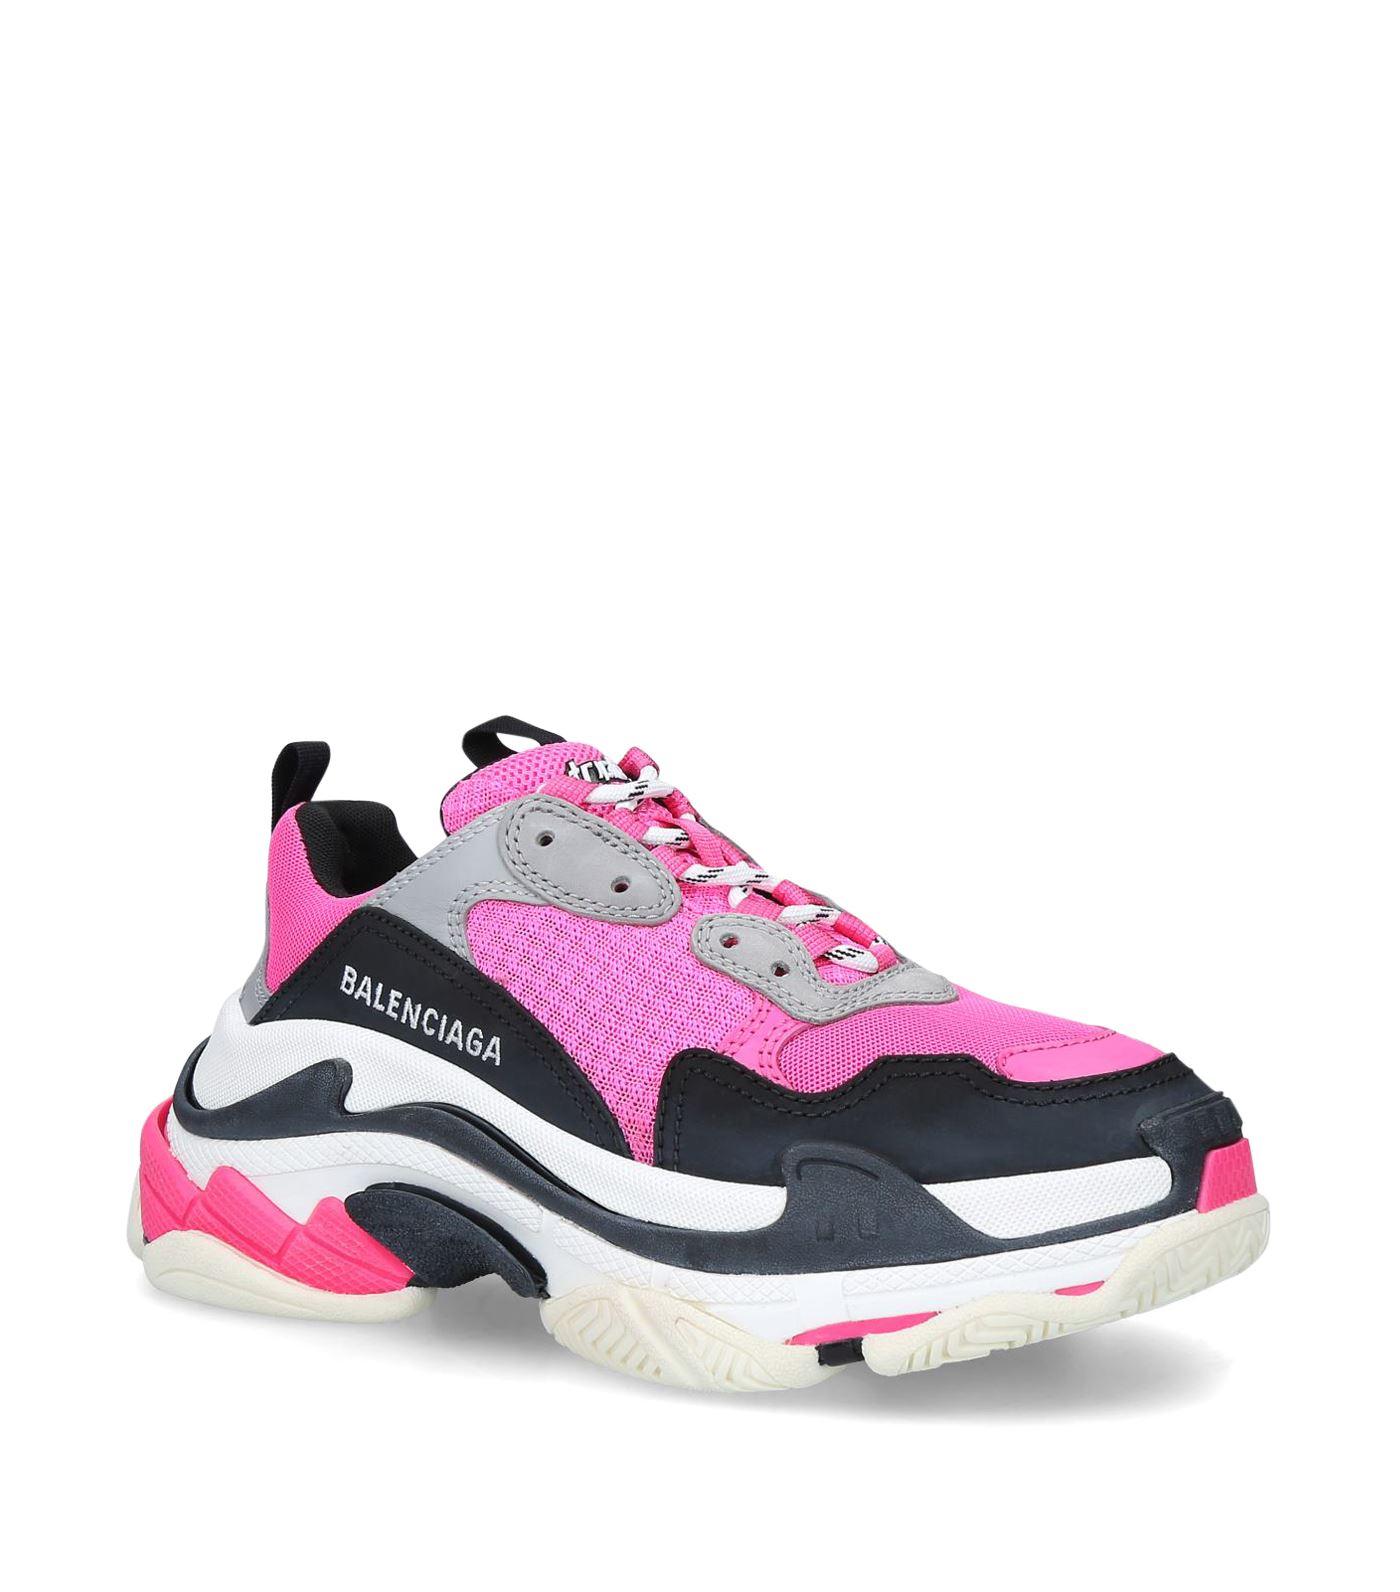 Balenciaga Triple S Sneakers in Pink - Save 7% - Lyst